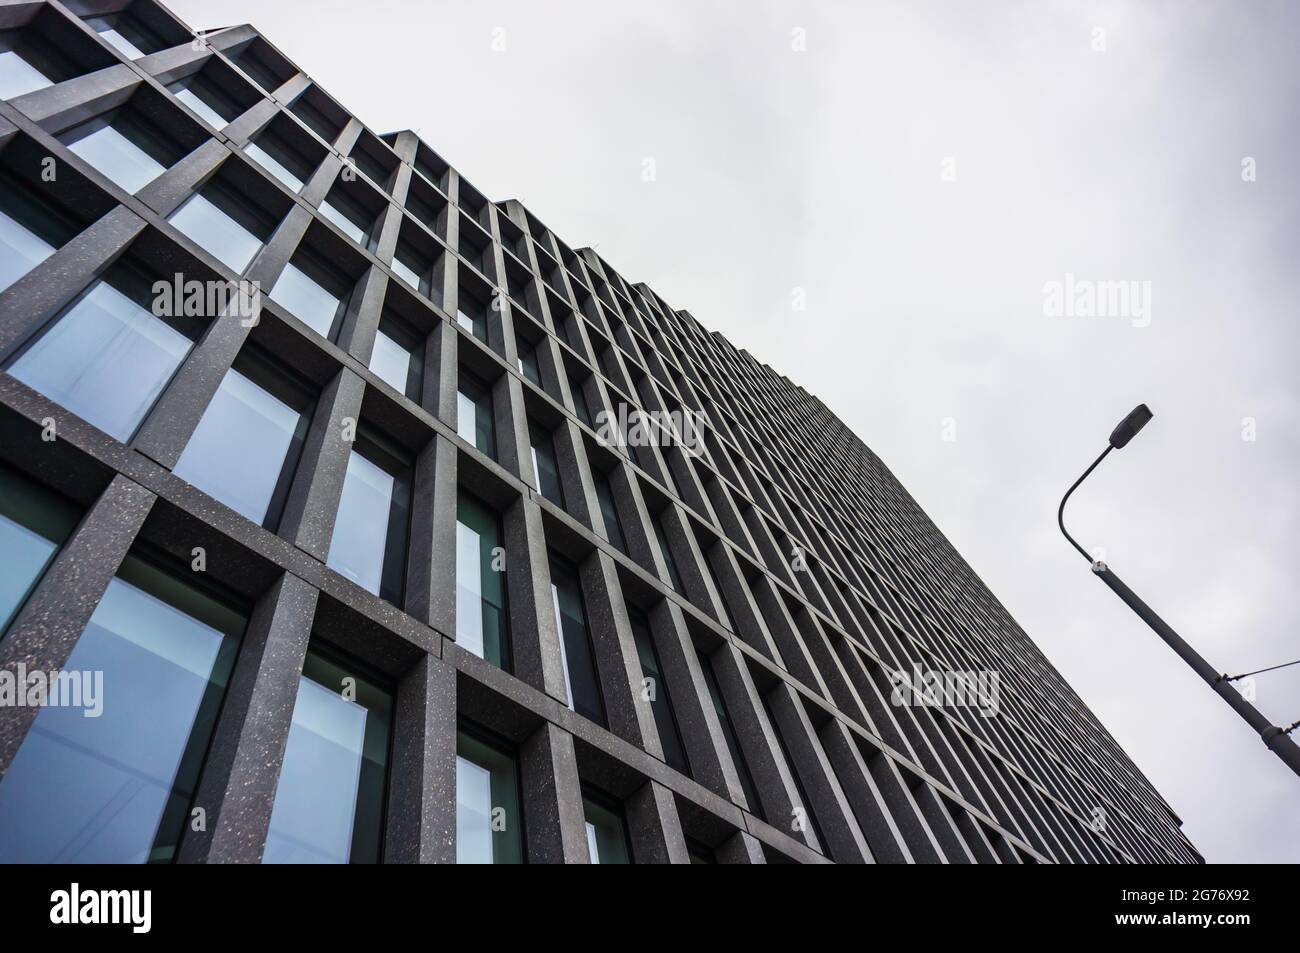 POZNAN, POLAND - Nov 16, 2018: A closeup of the modern Baltyk office building with many windows located on the Roosevelta street Stock Photo